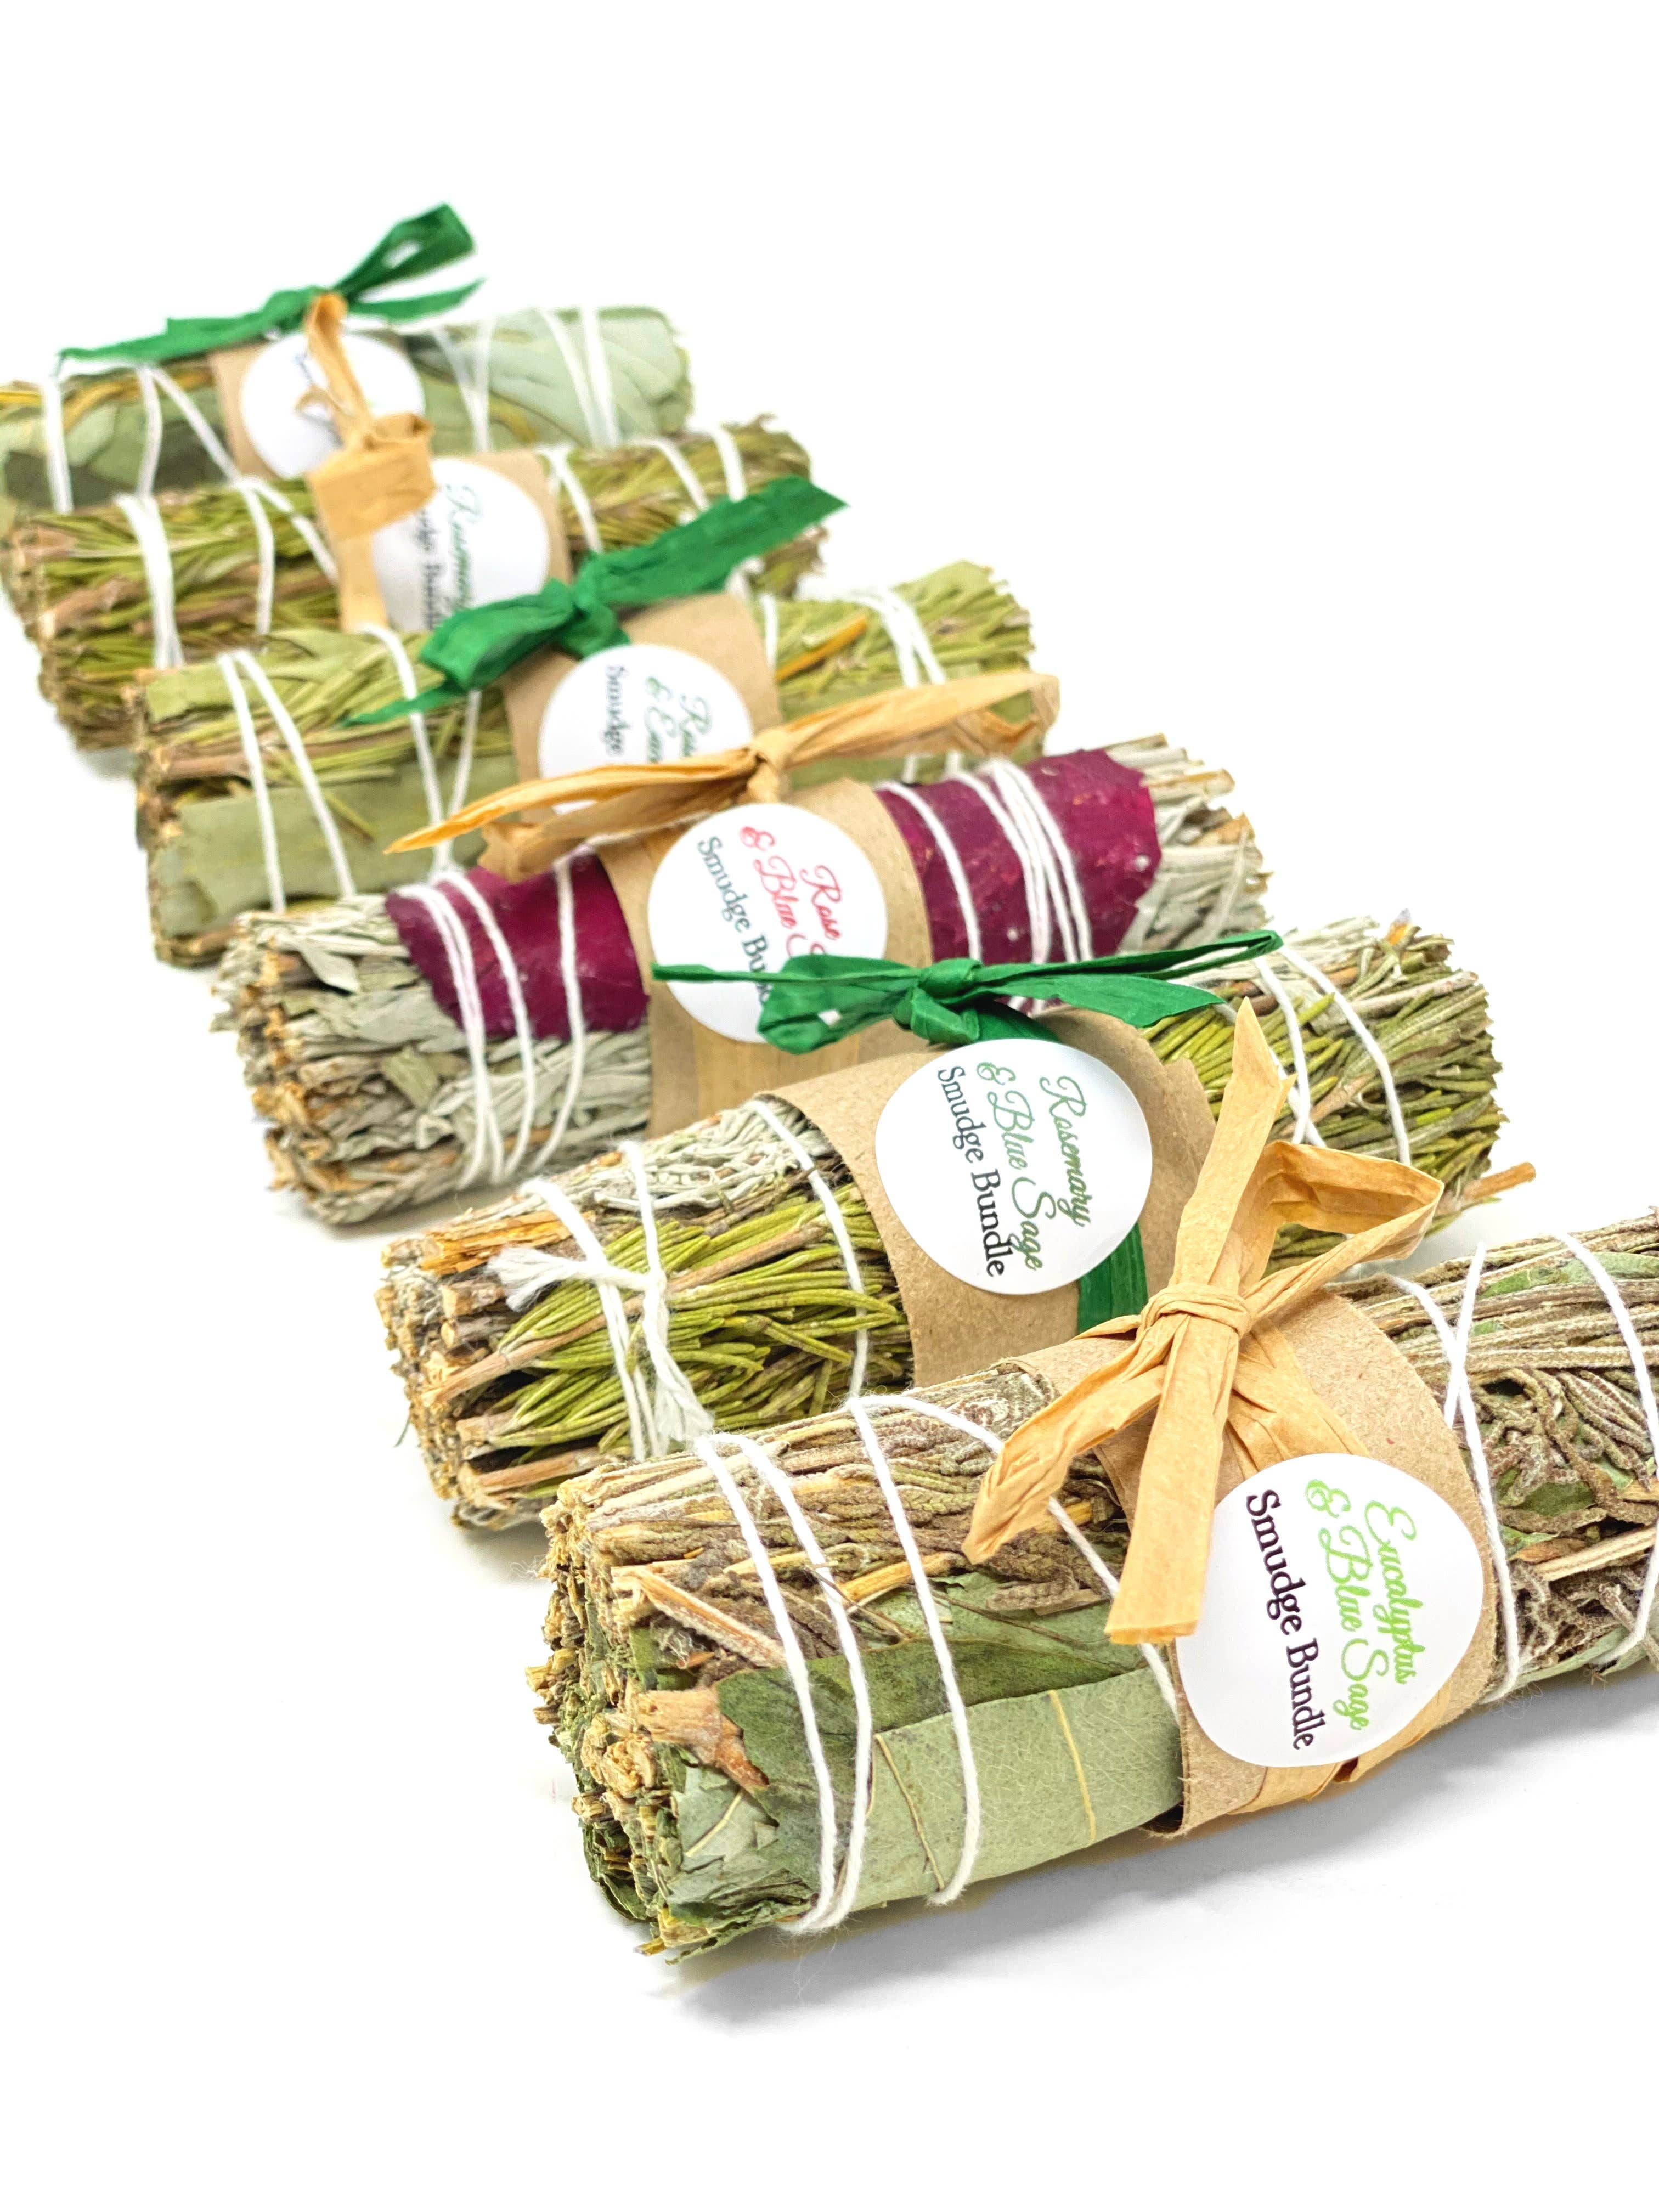 Rosemary and Sage Smudge Bundles: